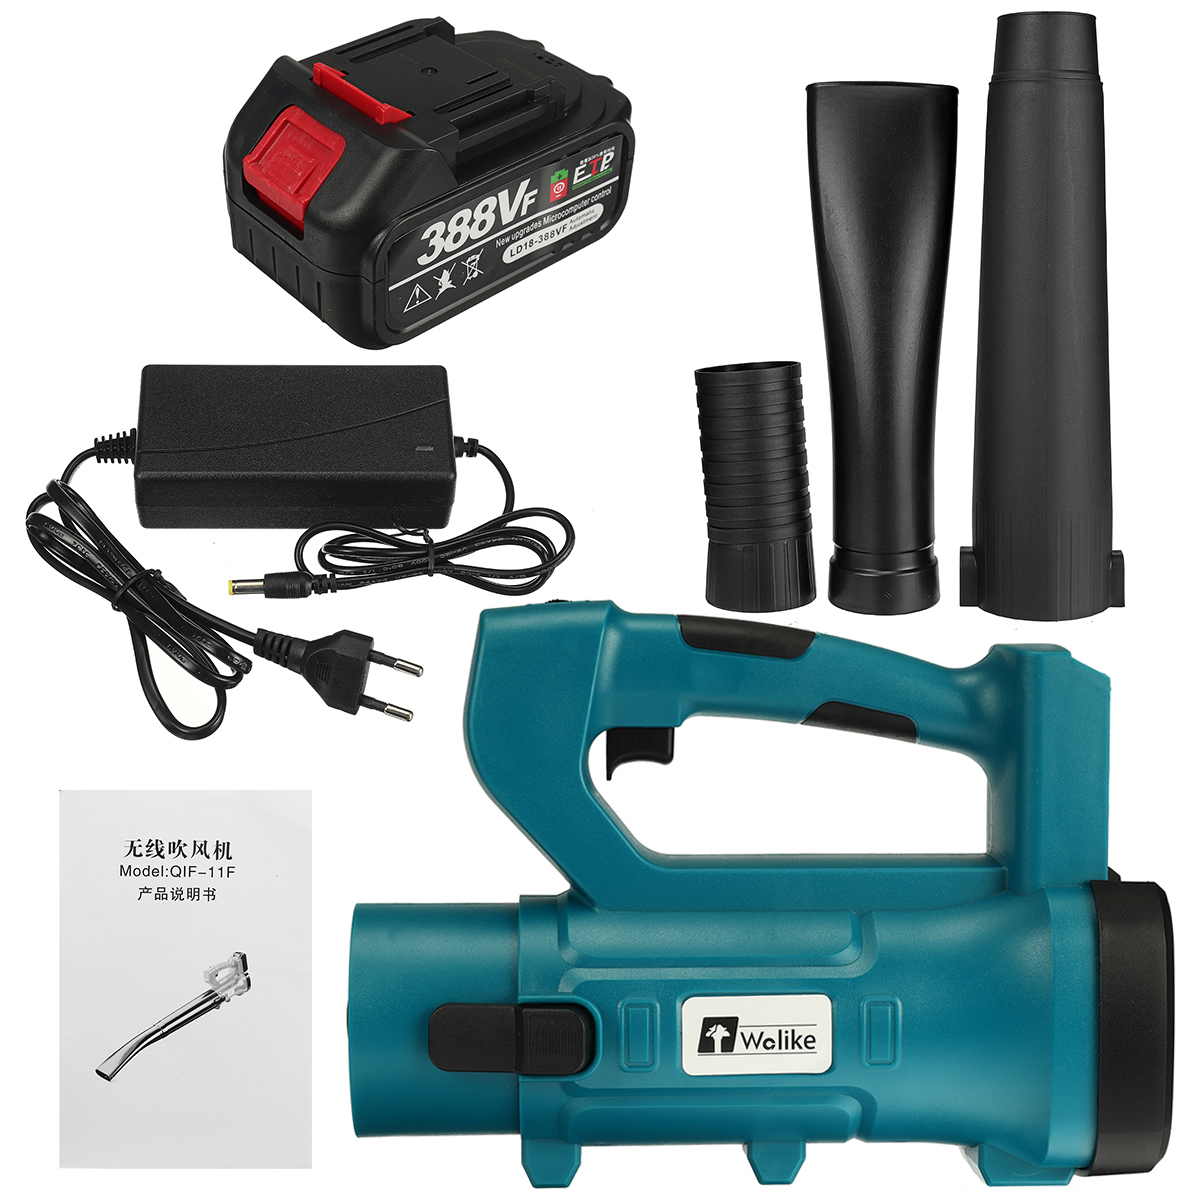 Wolike-388VF-Cordless-Air-Blower-3000W-High-Power-Snow-Blower-Portable-Electric-Rechargeable-Leaf-Bl-1918502-9